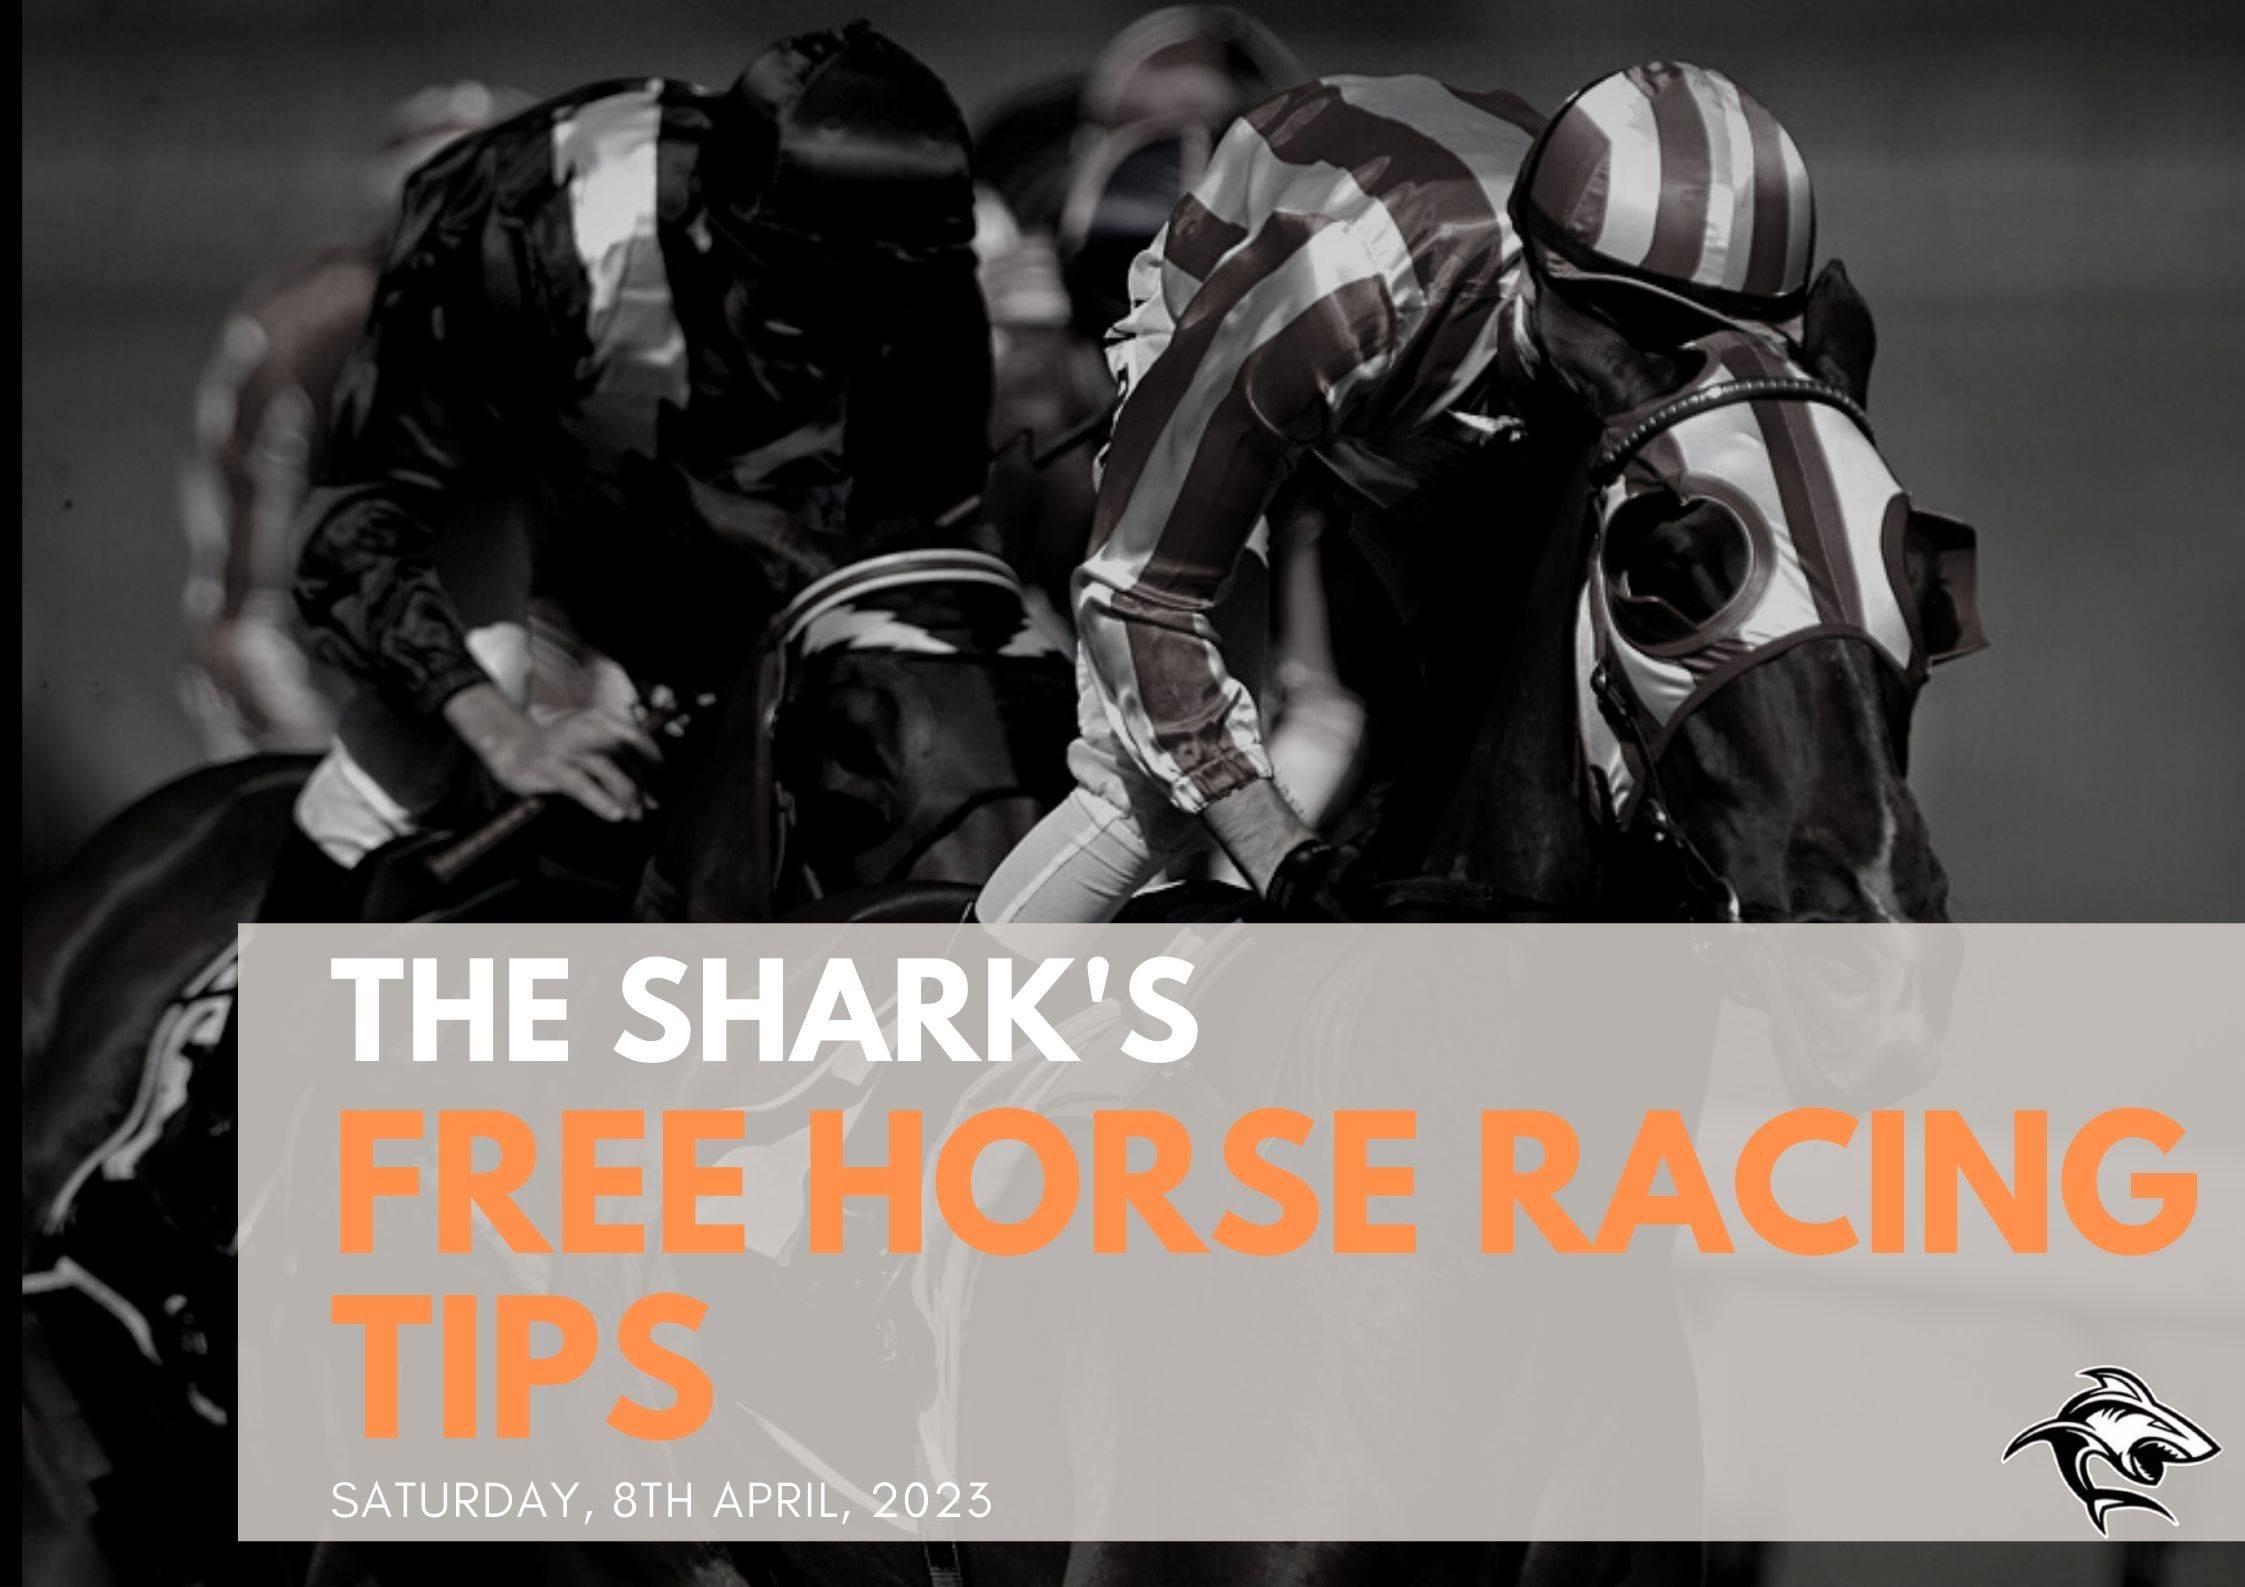 Free Horse Racing Tips - 8th Apr